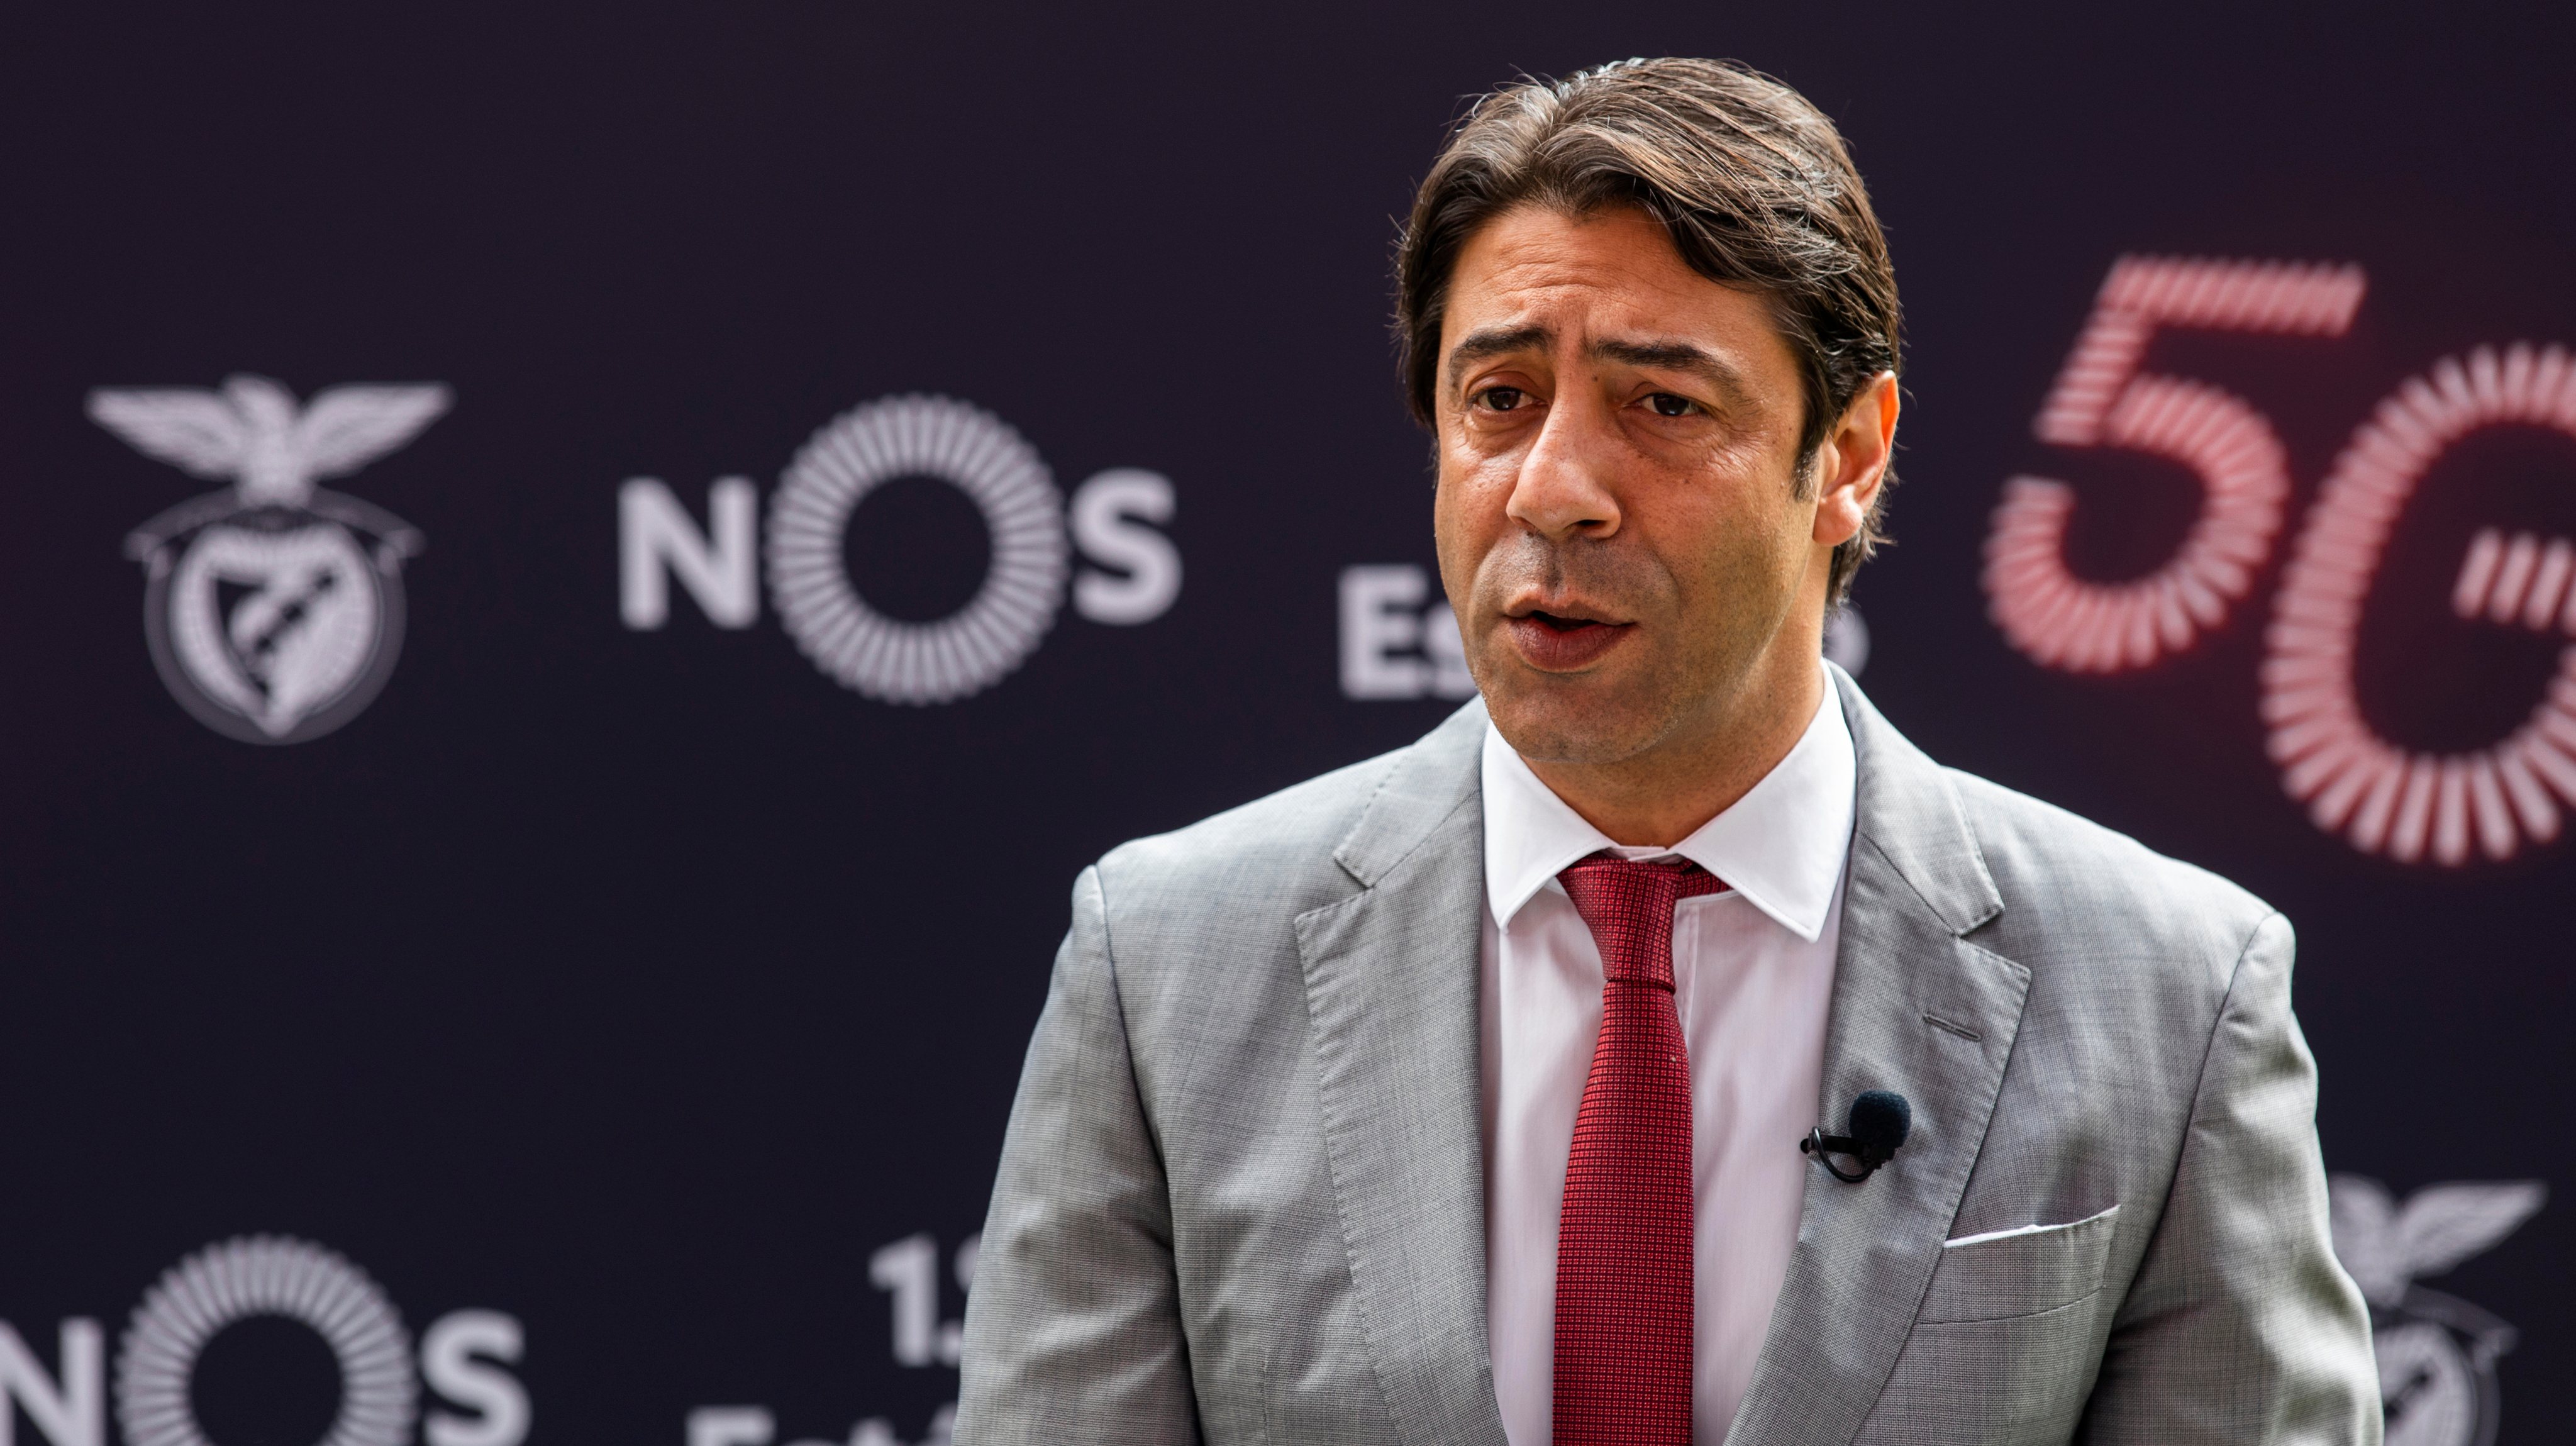 Rui Costa, Vice-President of SL Benfica speaks during a